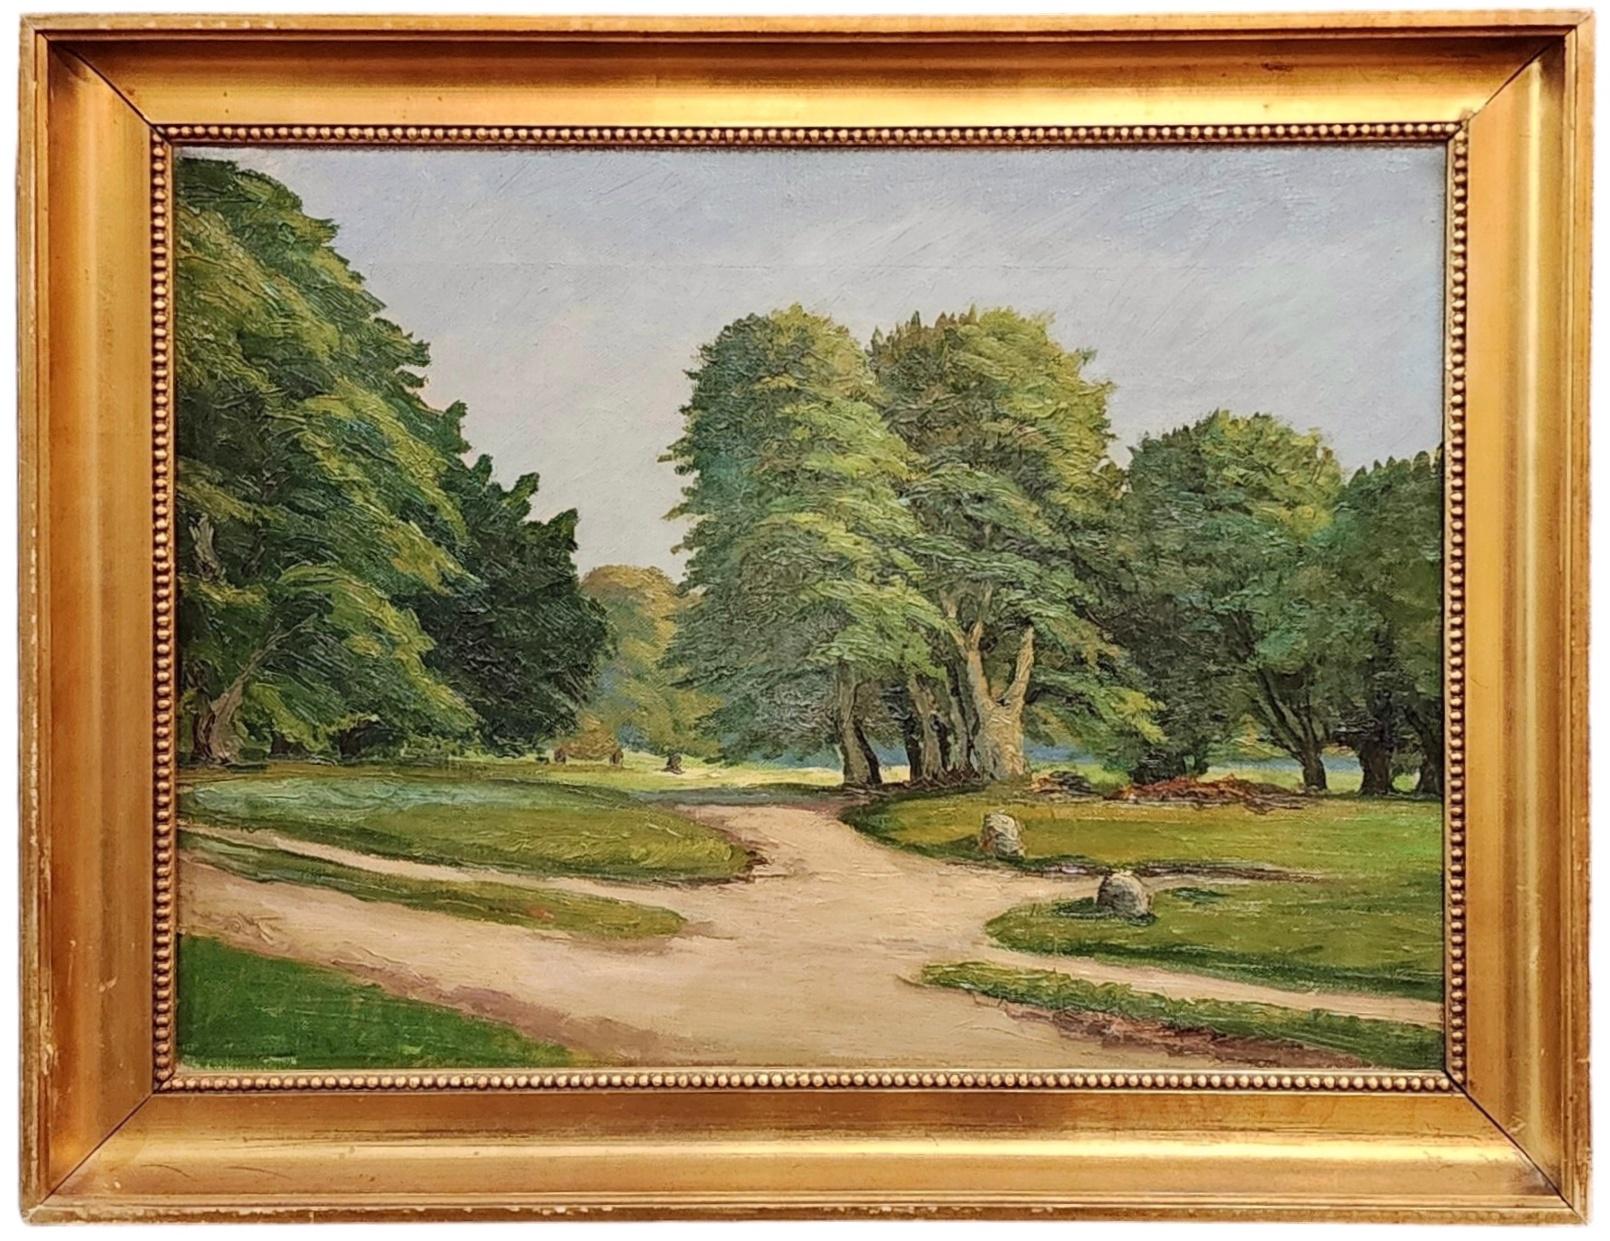 " Summer Landscape ", c. 1900 - 1910

Oil on Canvas

13 1/2" x 18 1/4"

Housed in a 1 1/2" Frame

Overall Size: 16 1/2" x 21 1/8"

Appears to be in very good condition.